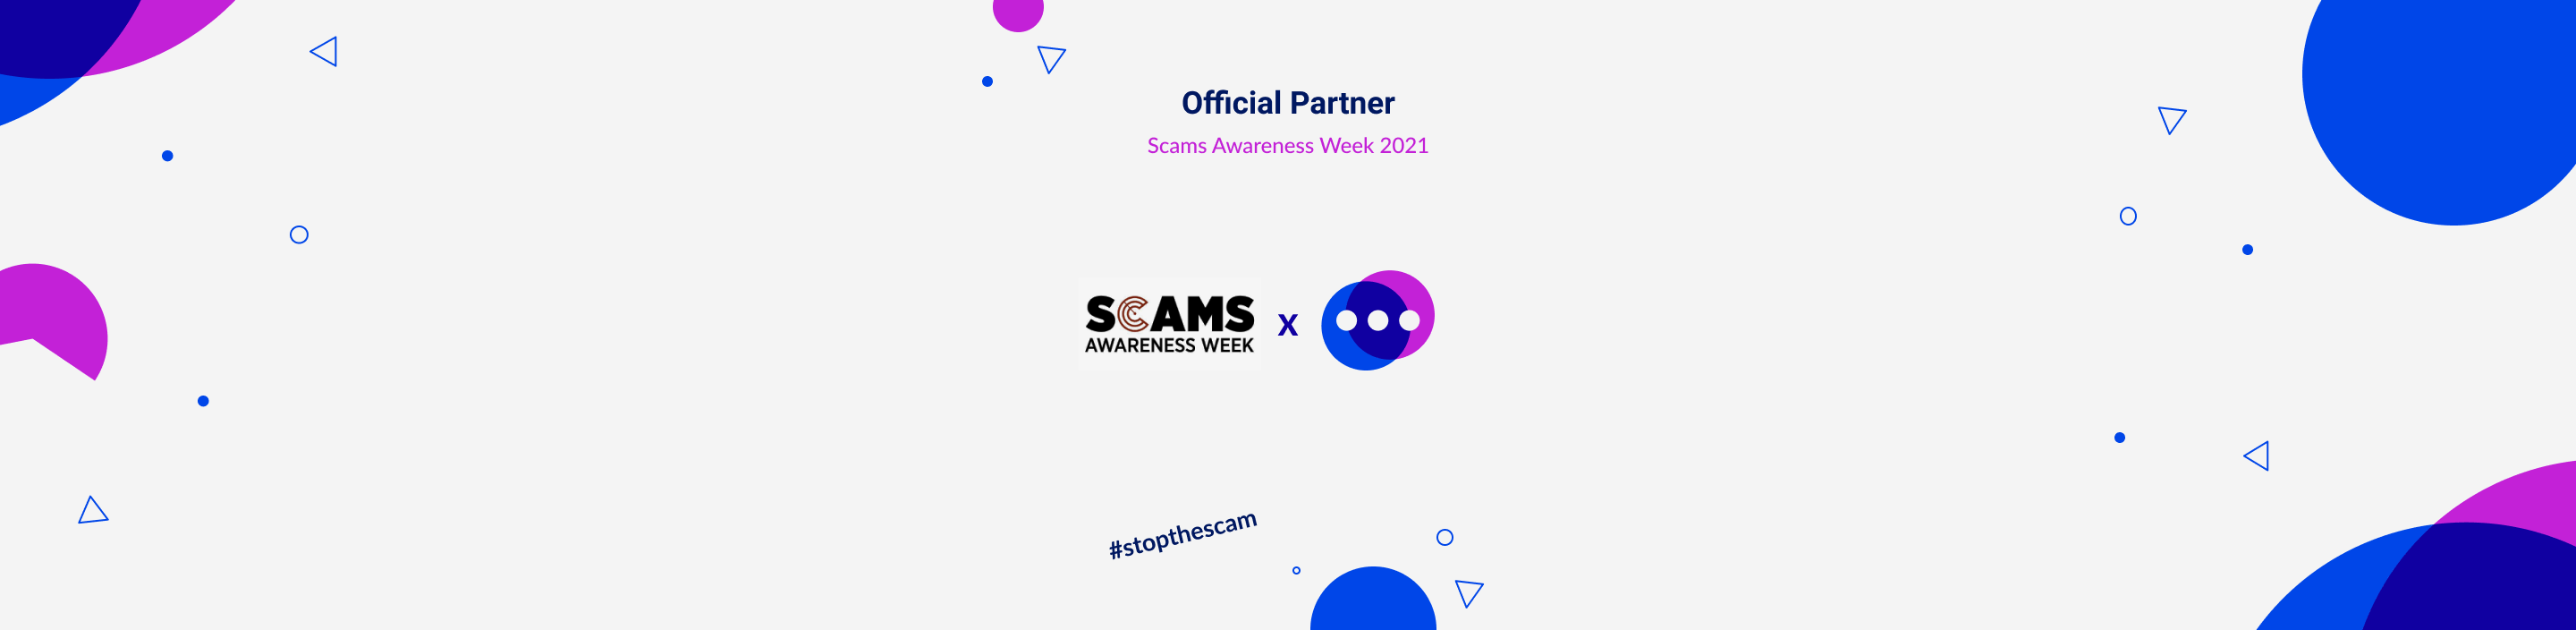 stop-the-scam-official-partners-of-scams-awareness-week-2021